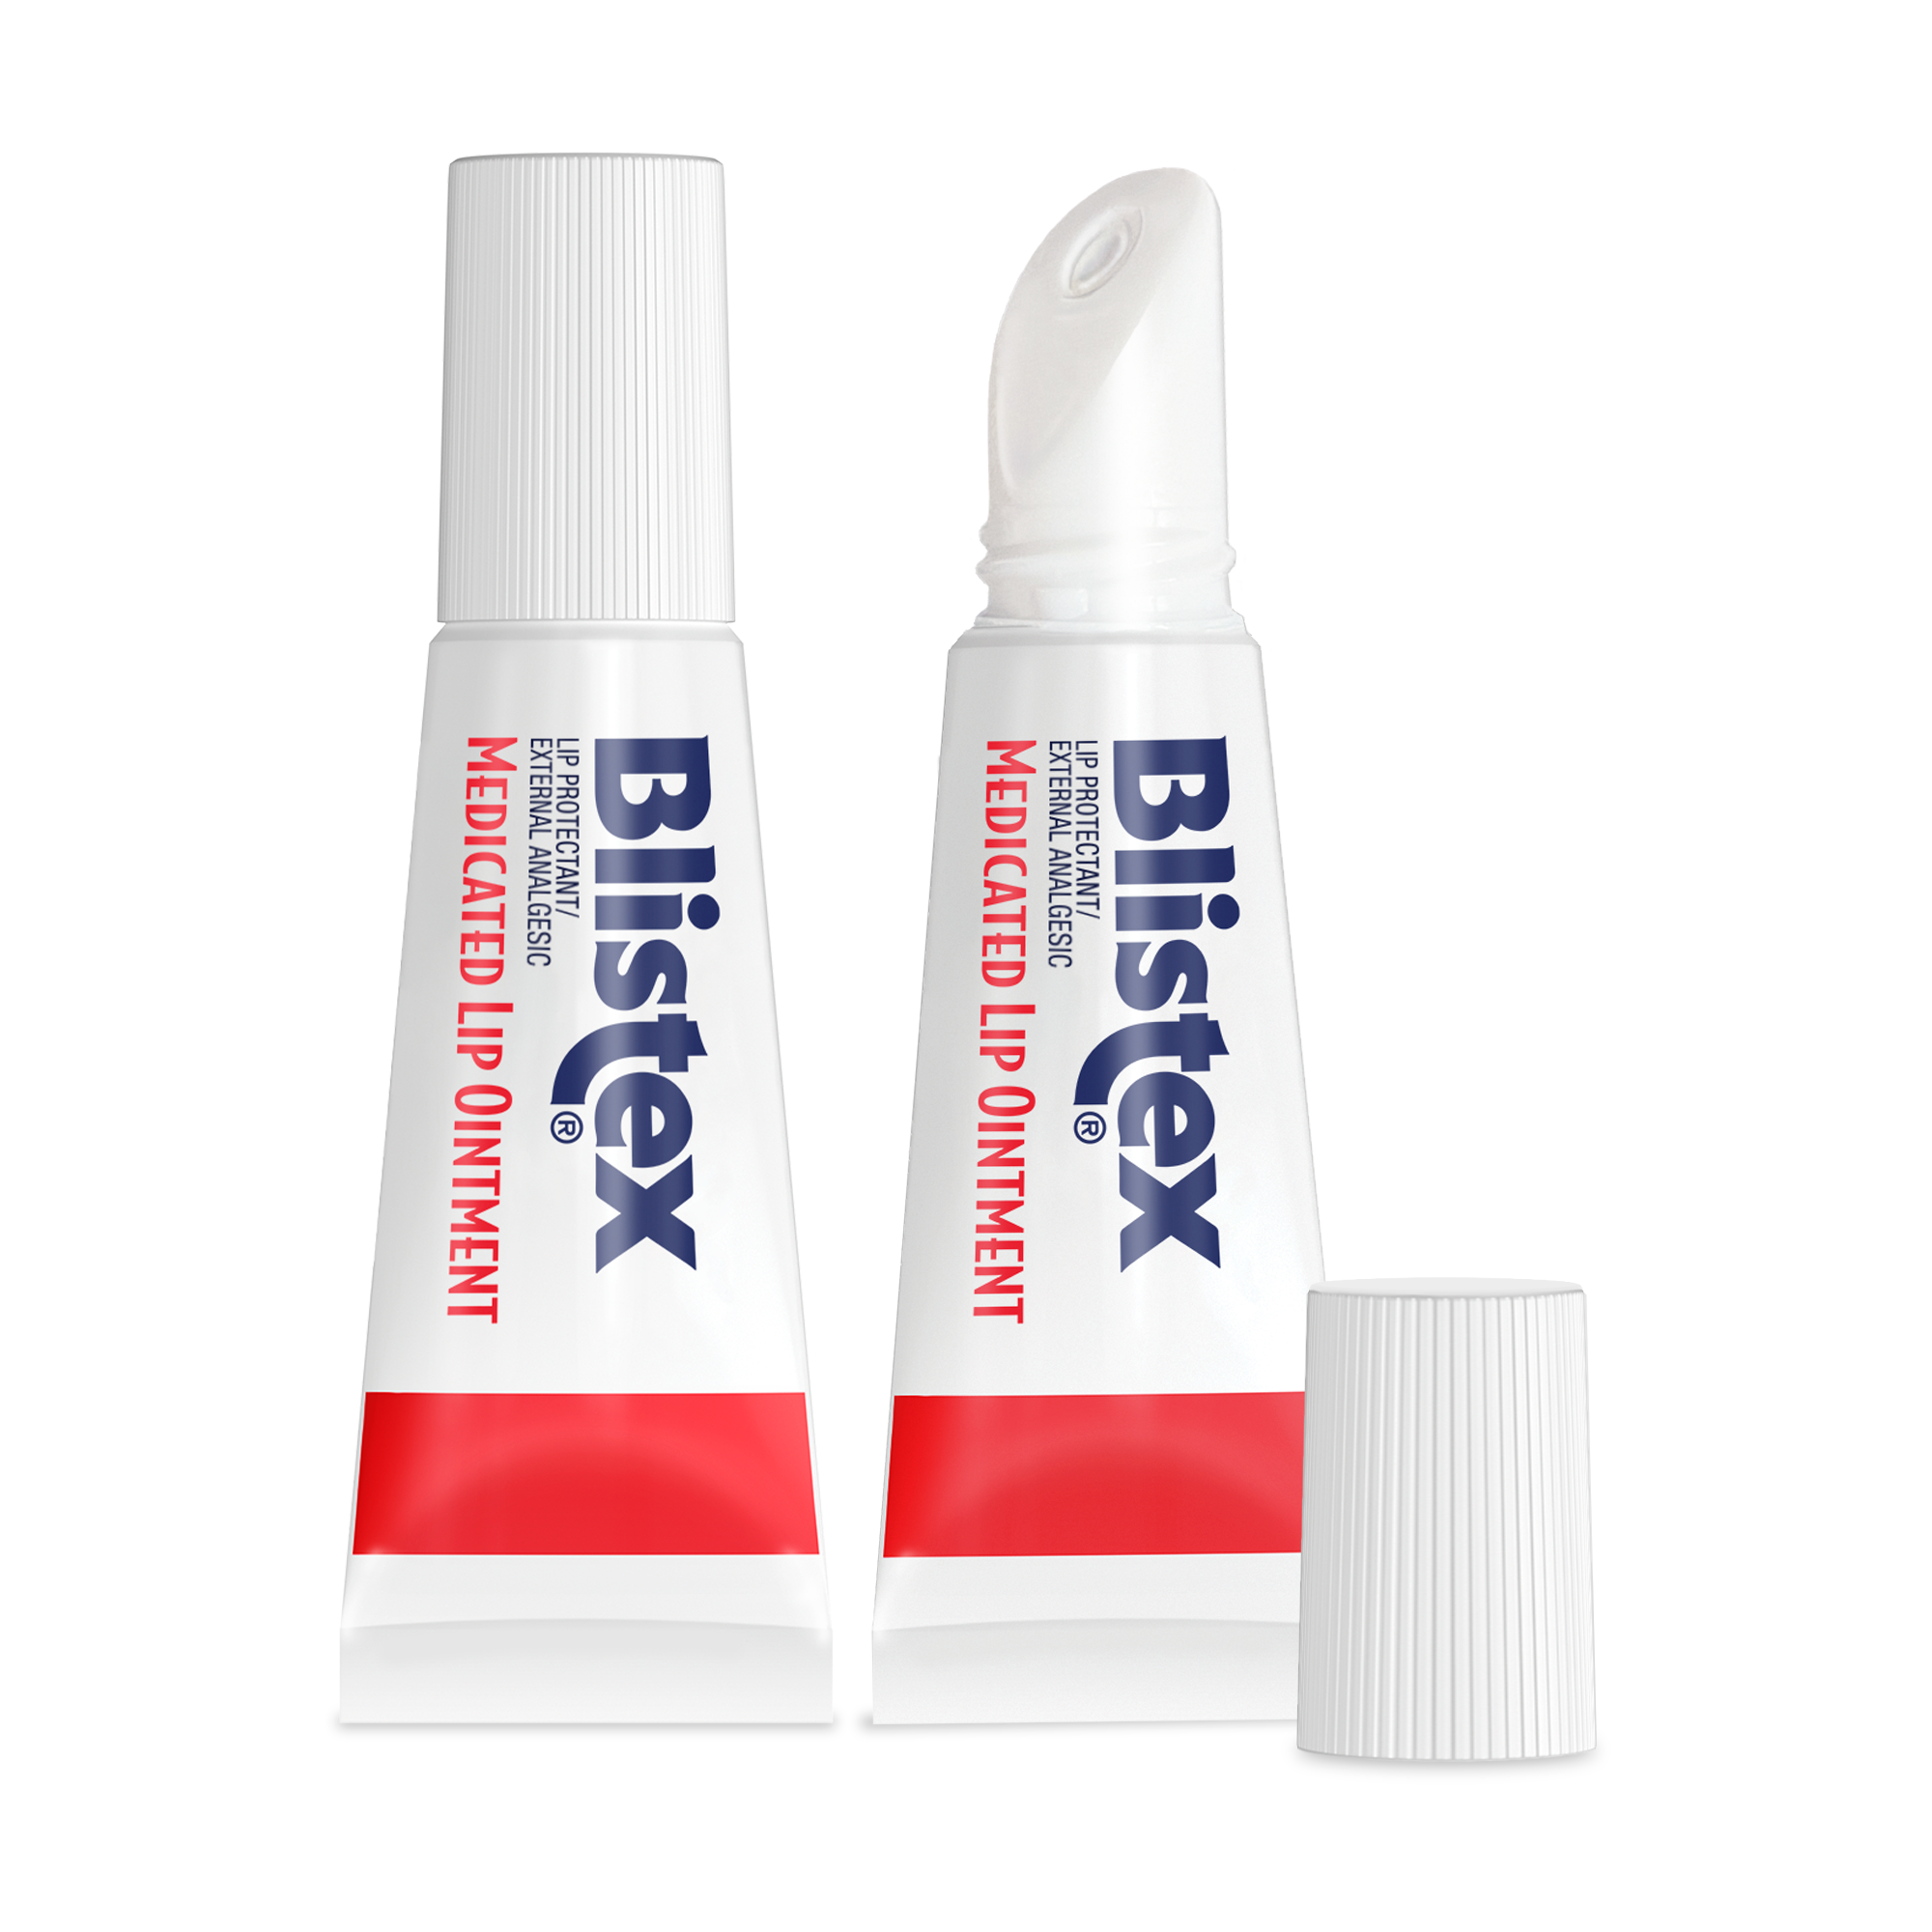 Blistex Medicated Lip Ointment Tube, 0.21 Ounce, Pack of 2 - image 2 of 7